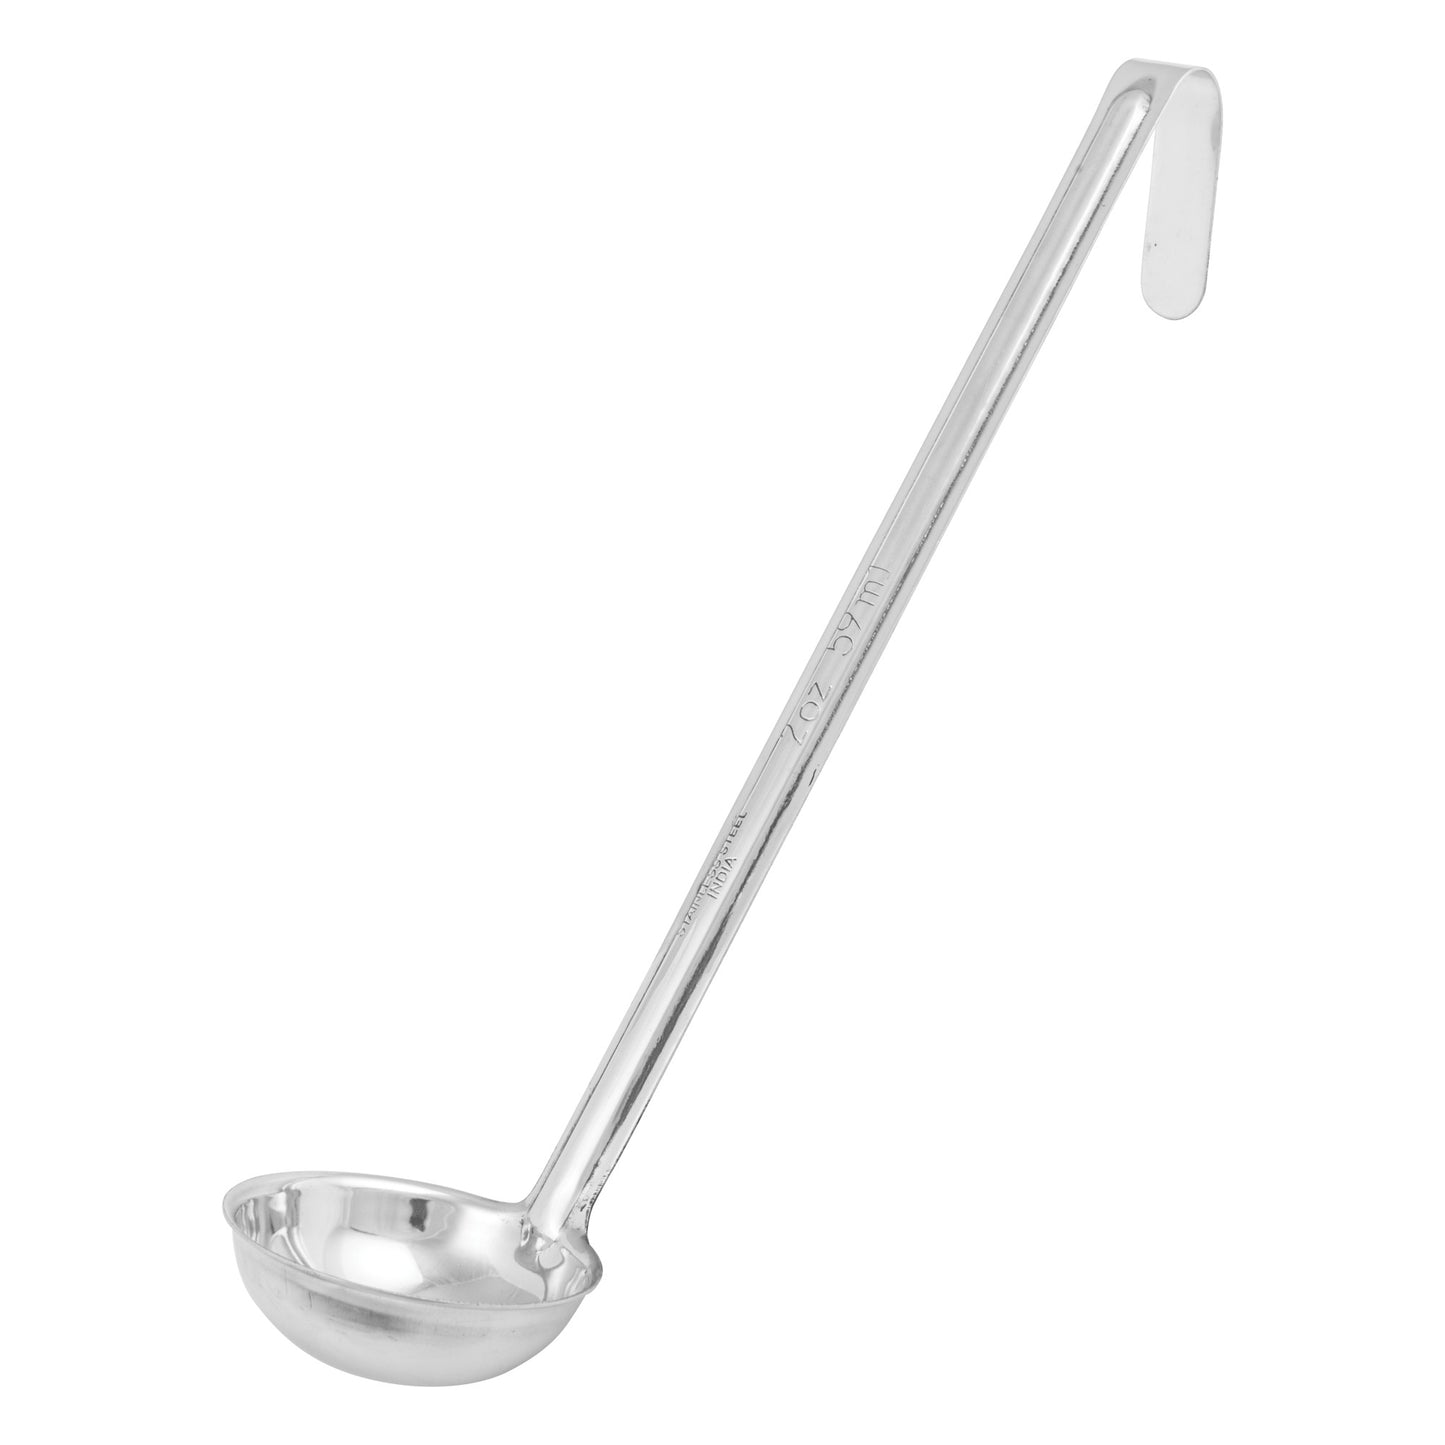 LDIN-2 - Winco Prime One-Piece Ladle, Stainless Steel - 2 oz